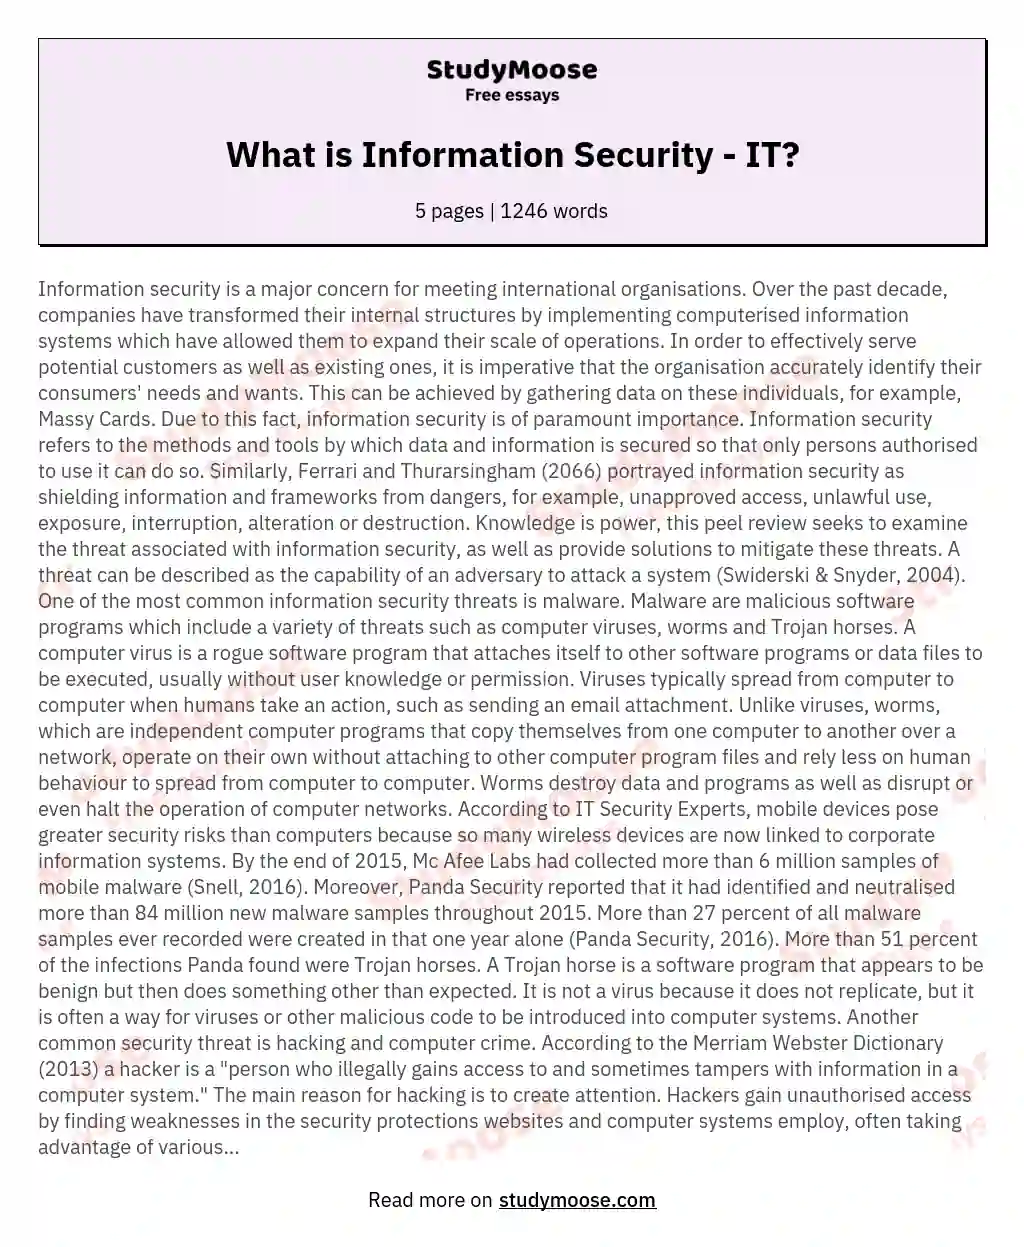 What is Information Security - IT? essay